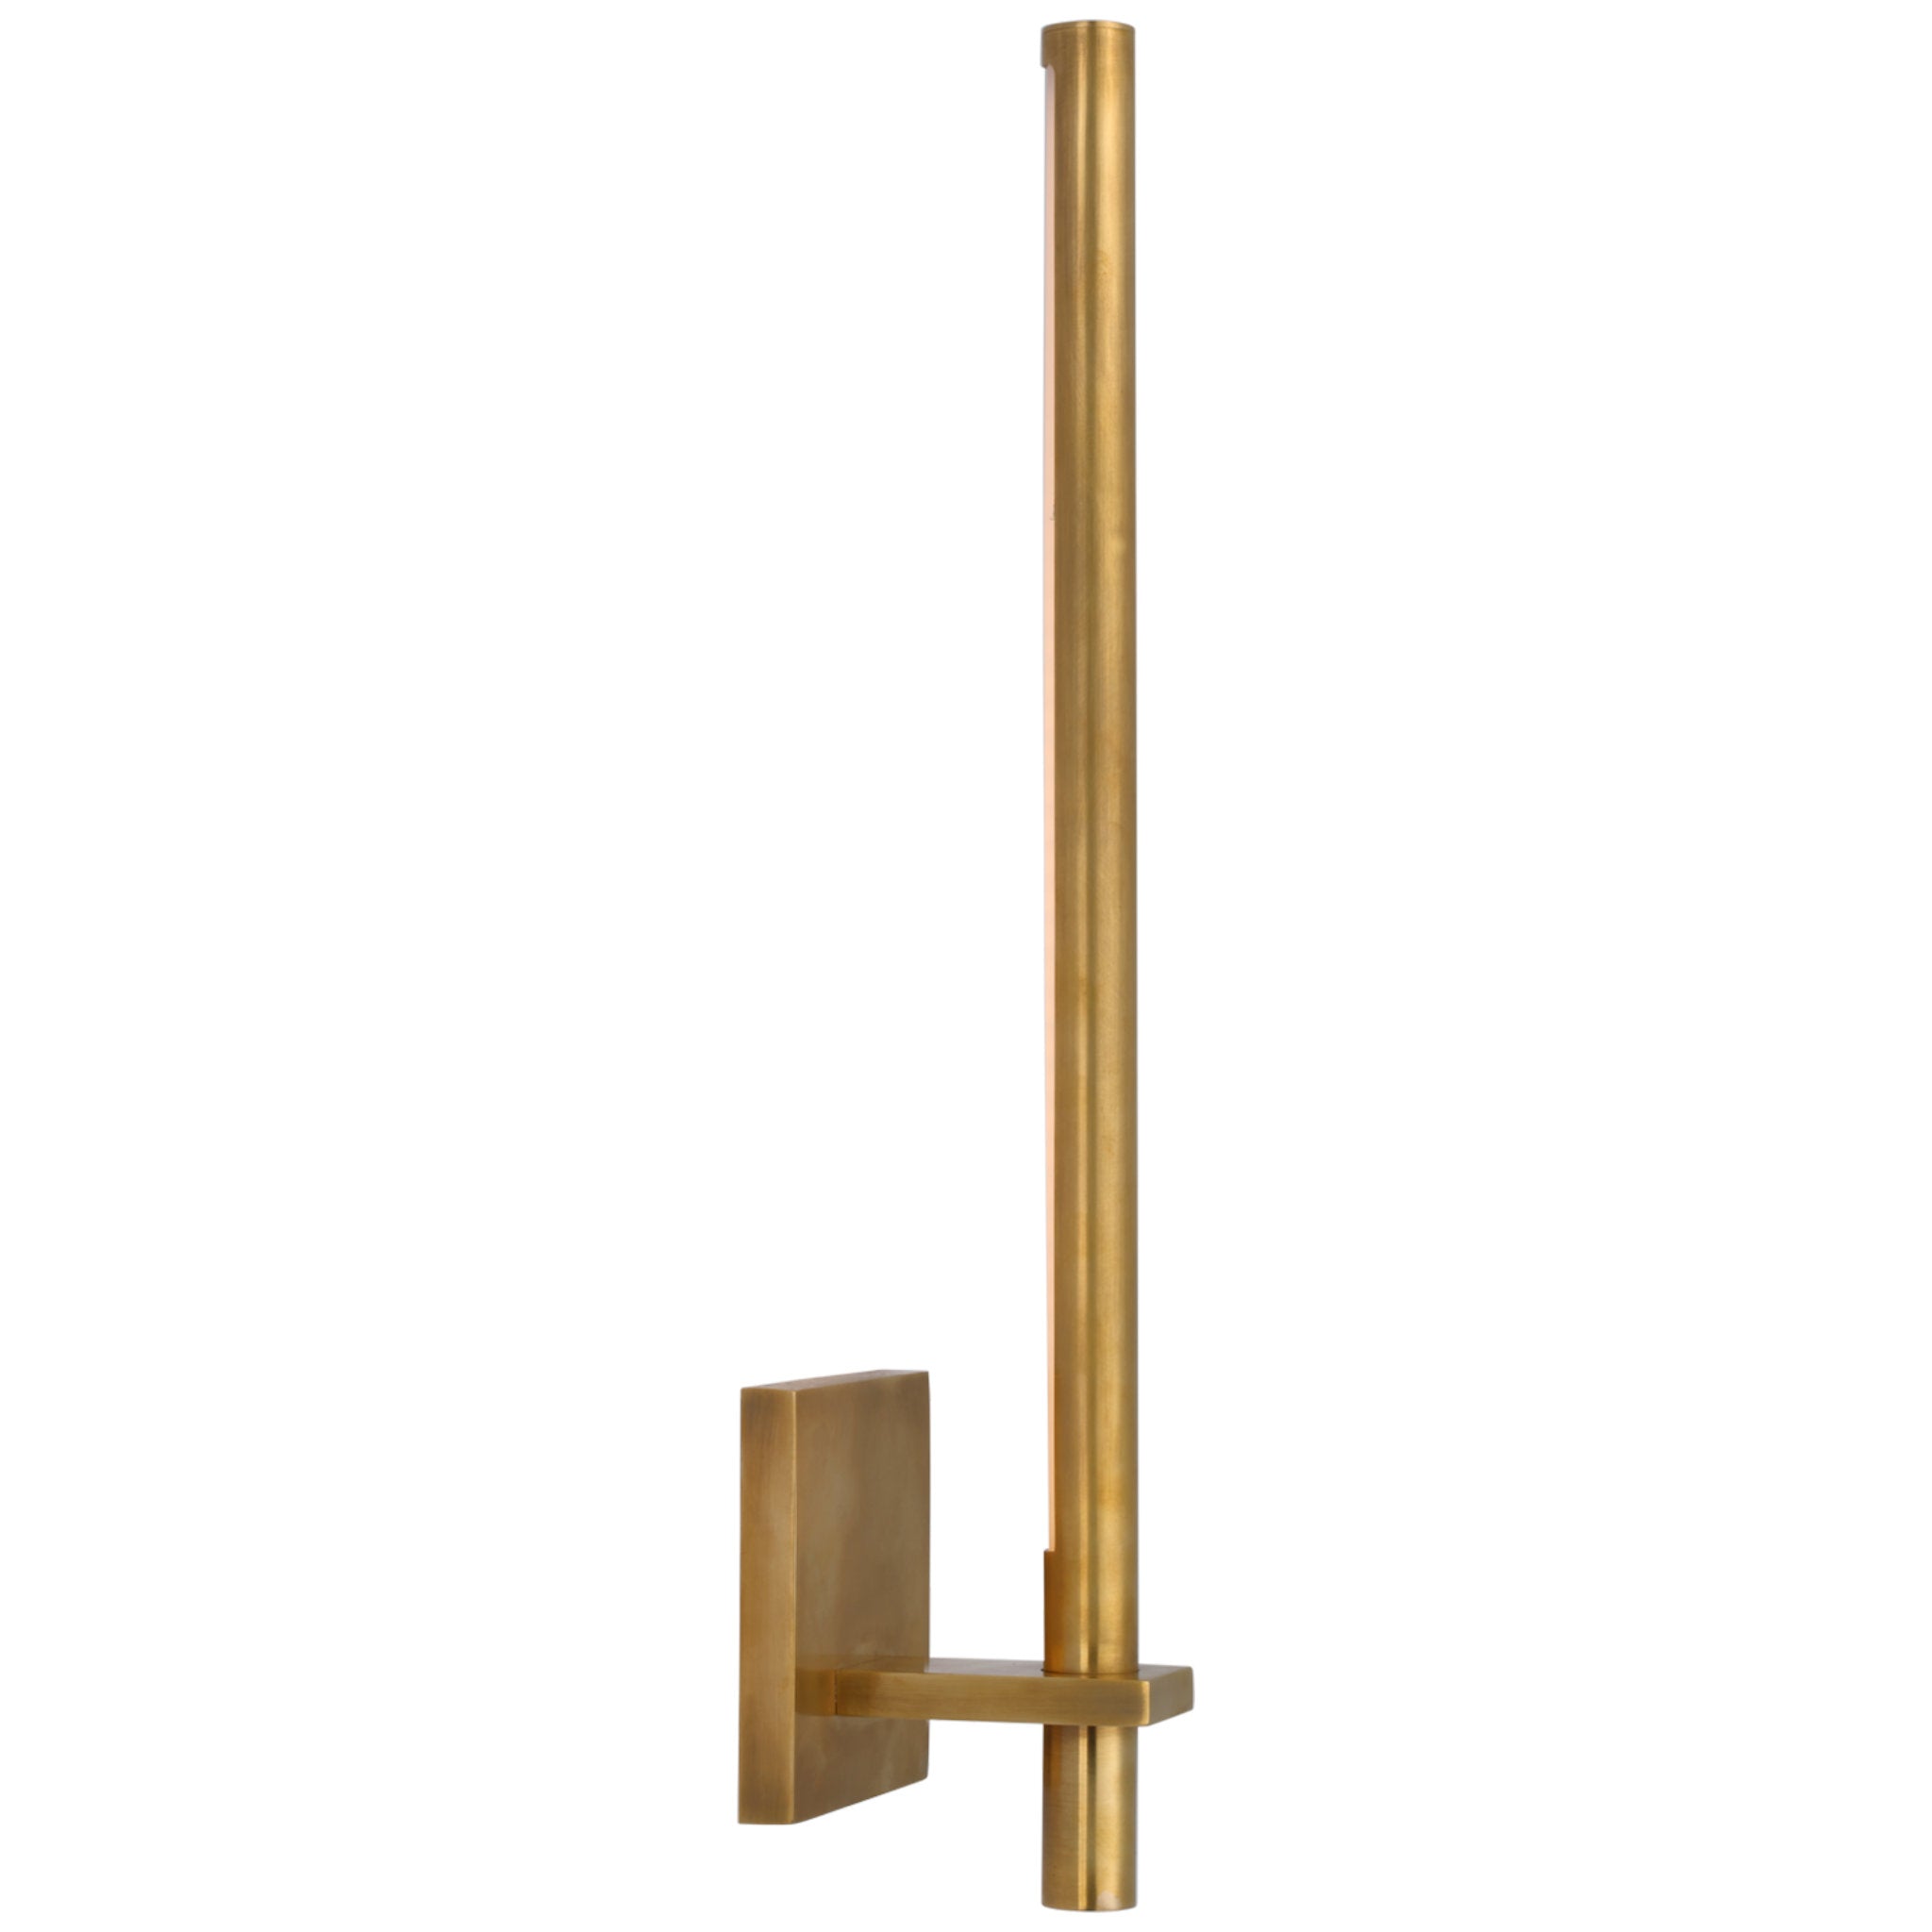 Kelly Wearstler Axis Medium Sconce in Antique-Burnished Brass